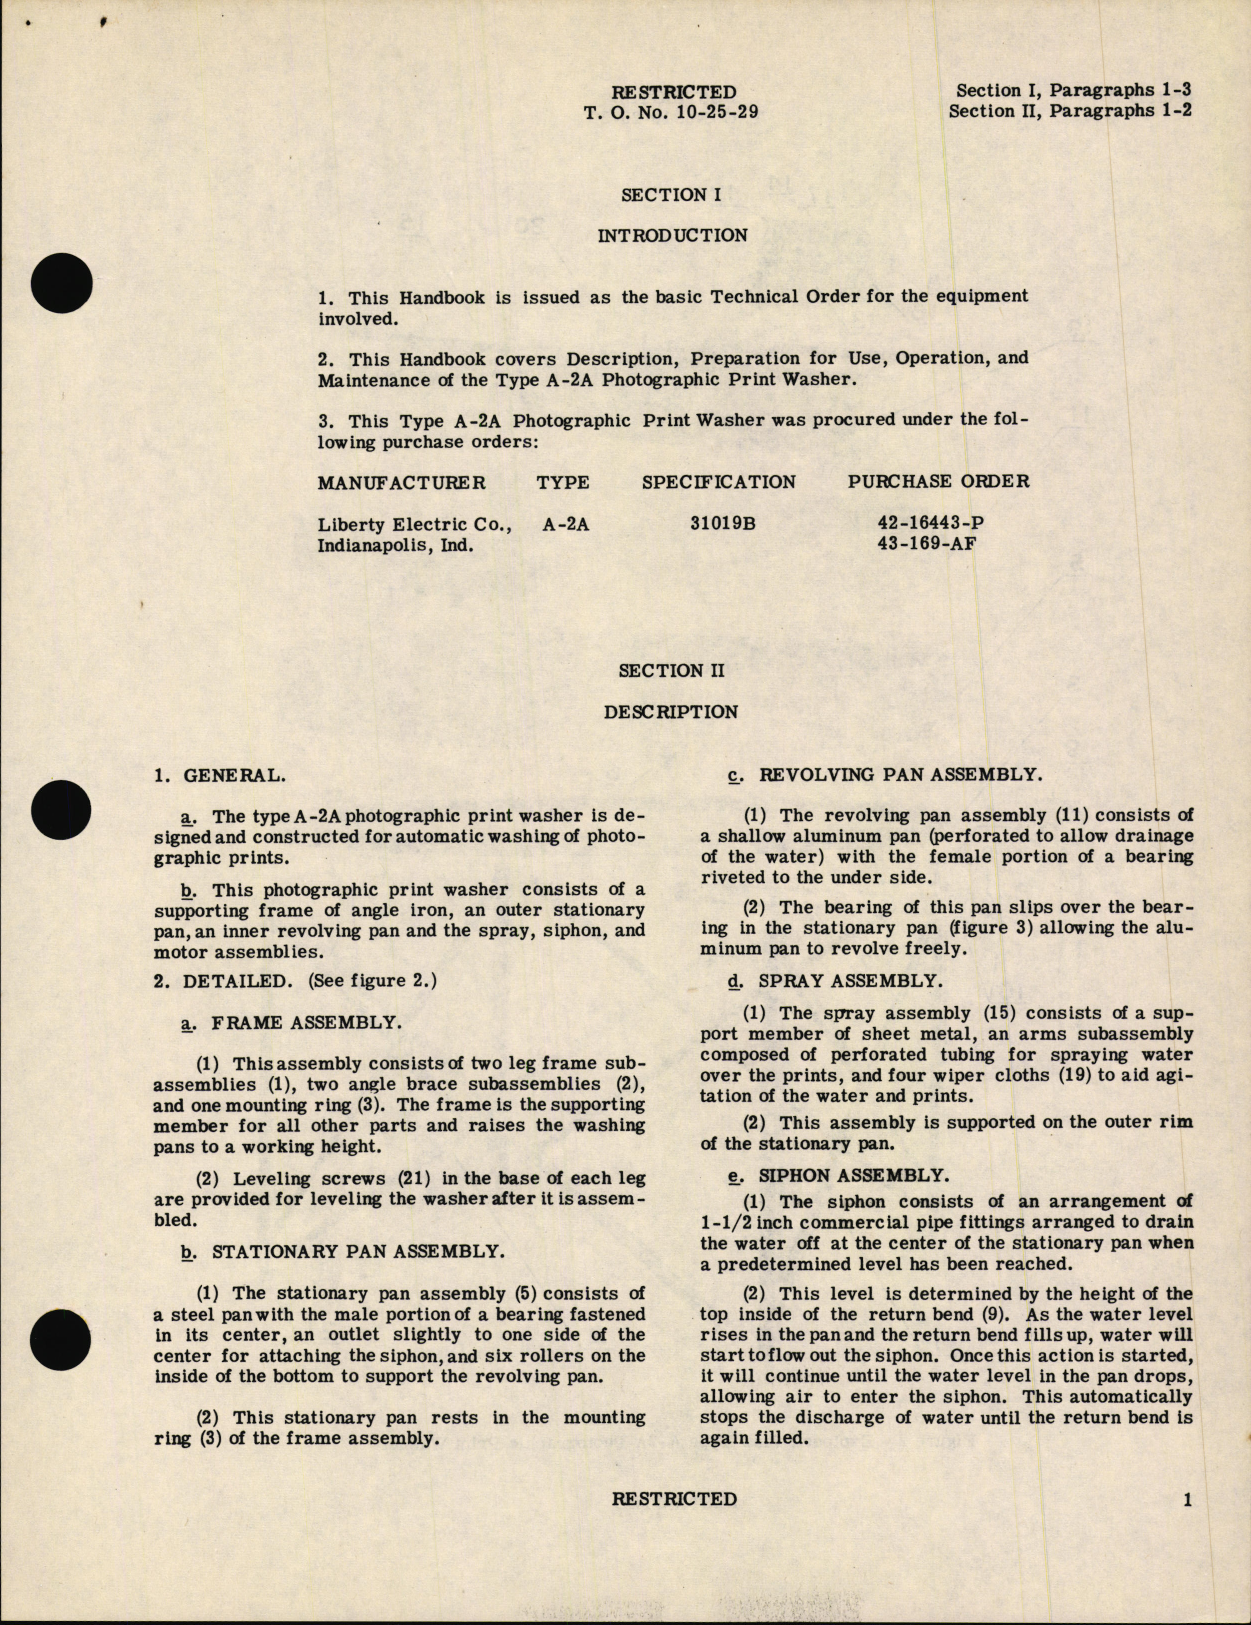 Sample page 7 from AirCorps Library document: Handbook of Operation and Service Instructions with Parts Catalog for Type A-2A Photographic Print Washer